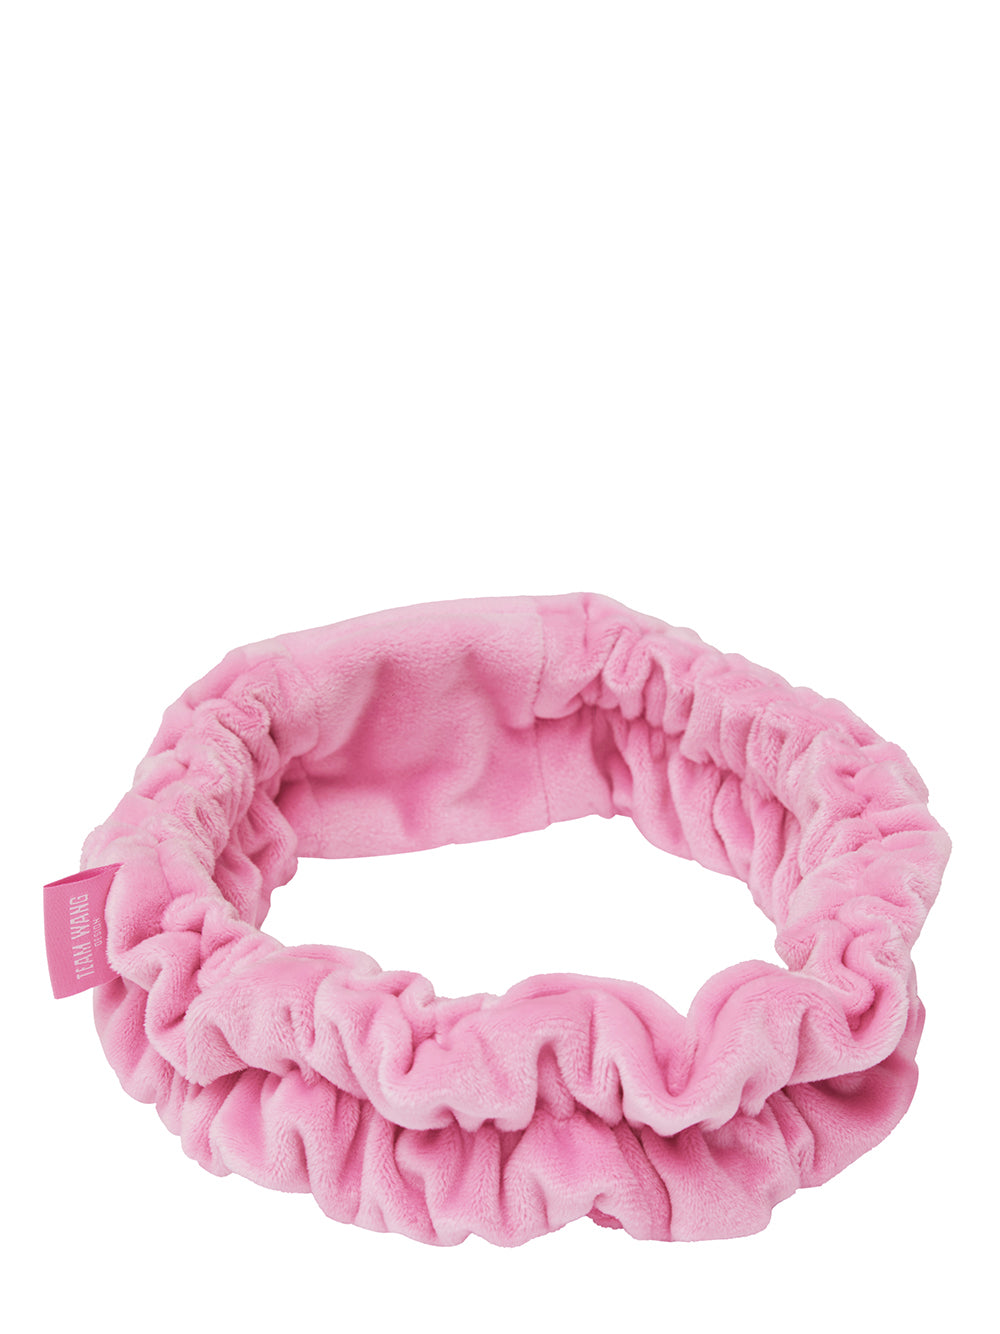 STAY FOR THE NIGHT SPA HEADBAND (PINK)